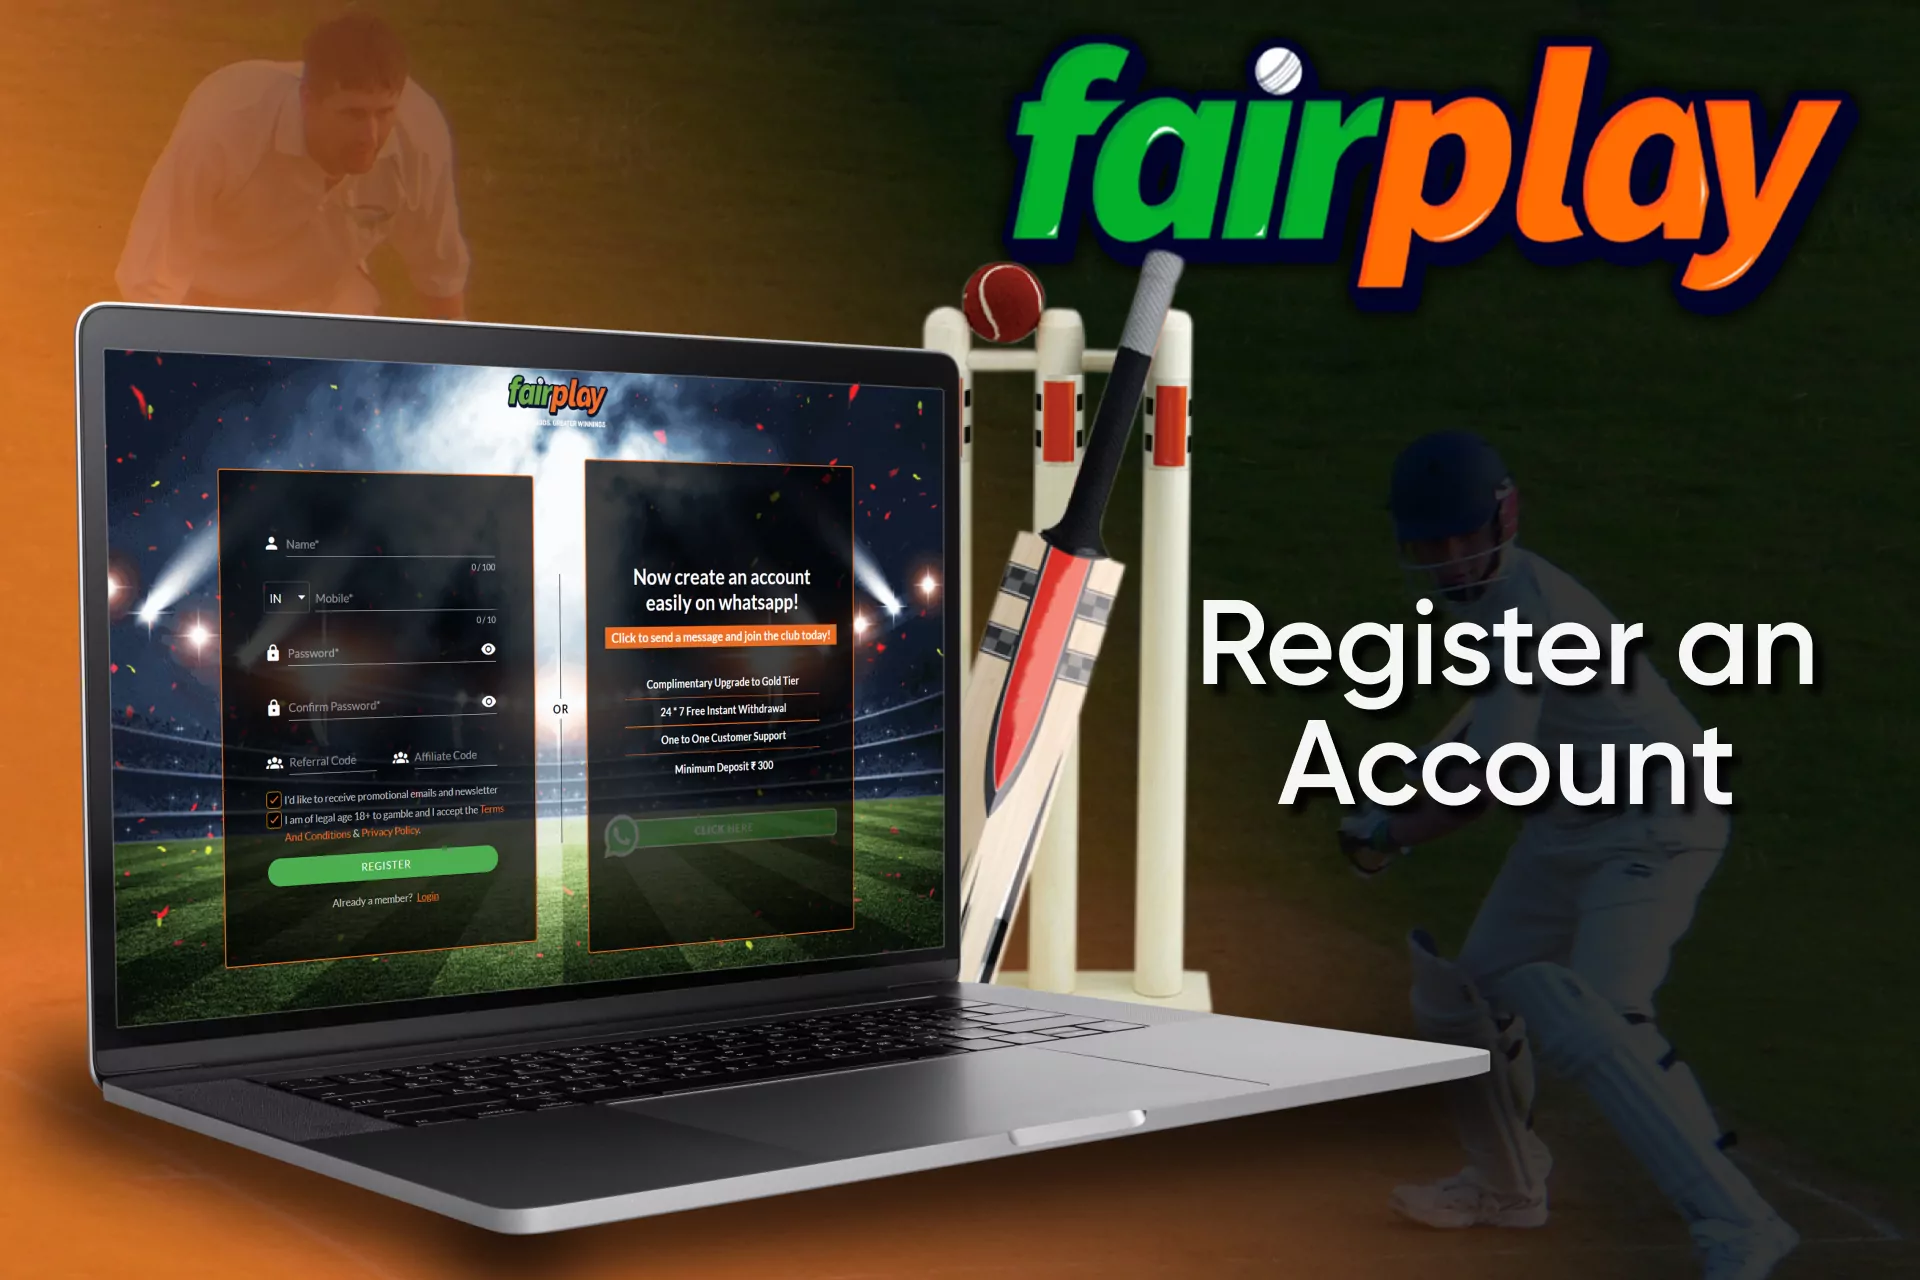 Create an account to start betting on cricket on Fairplay.